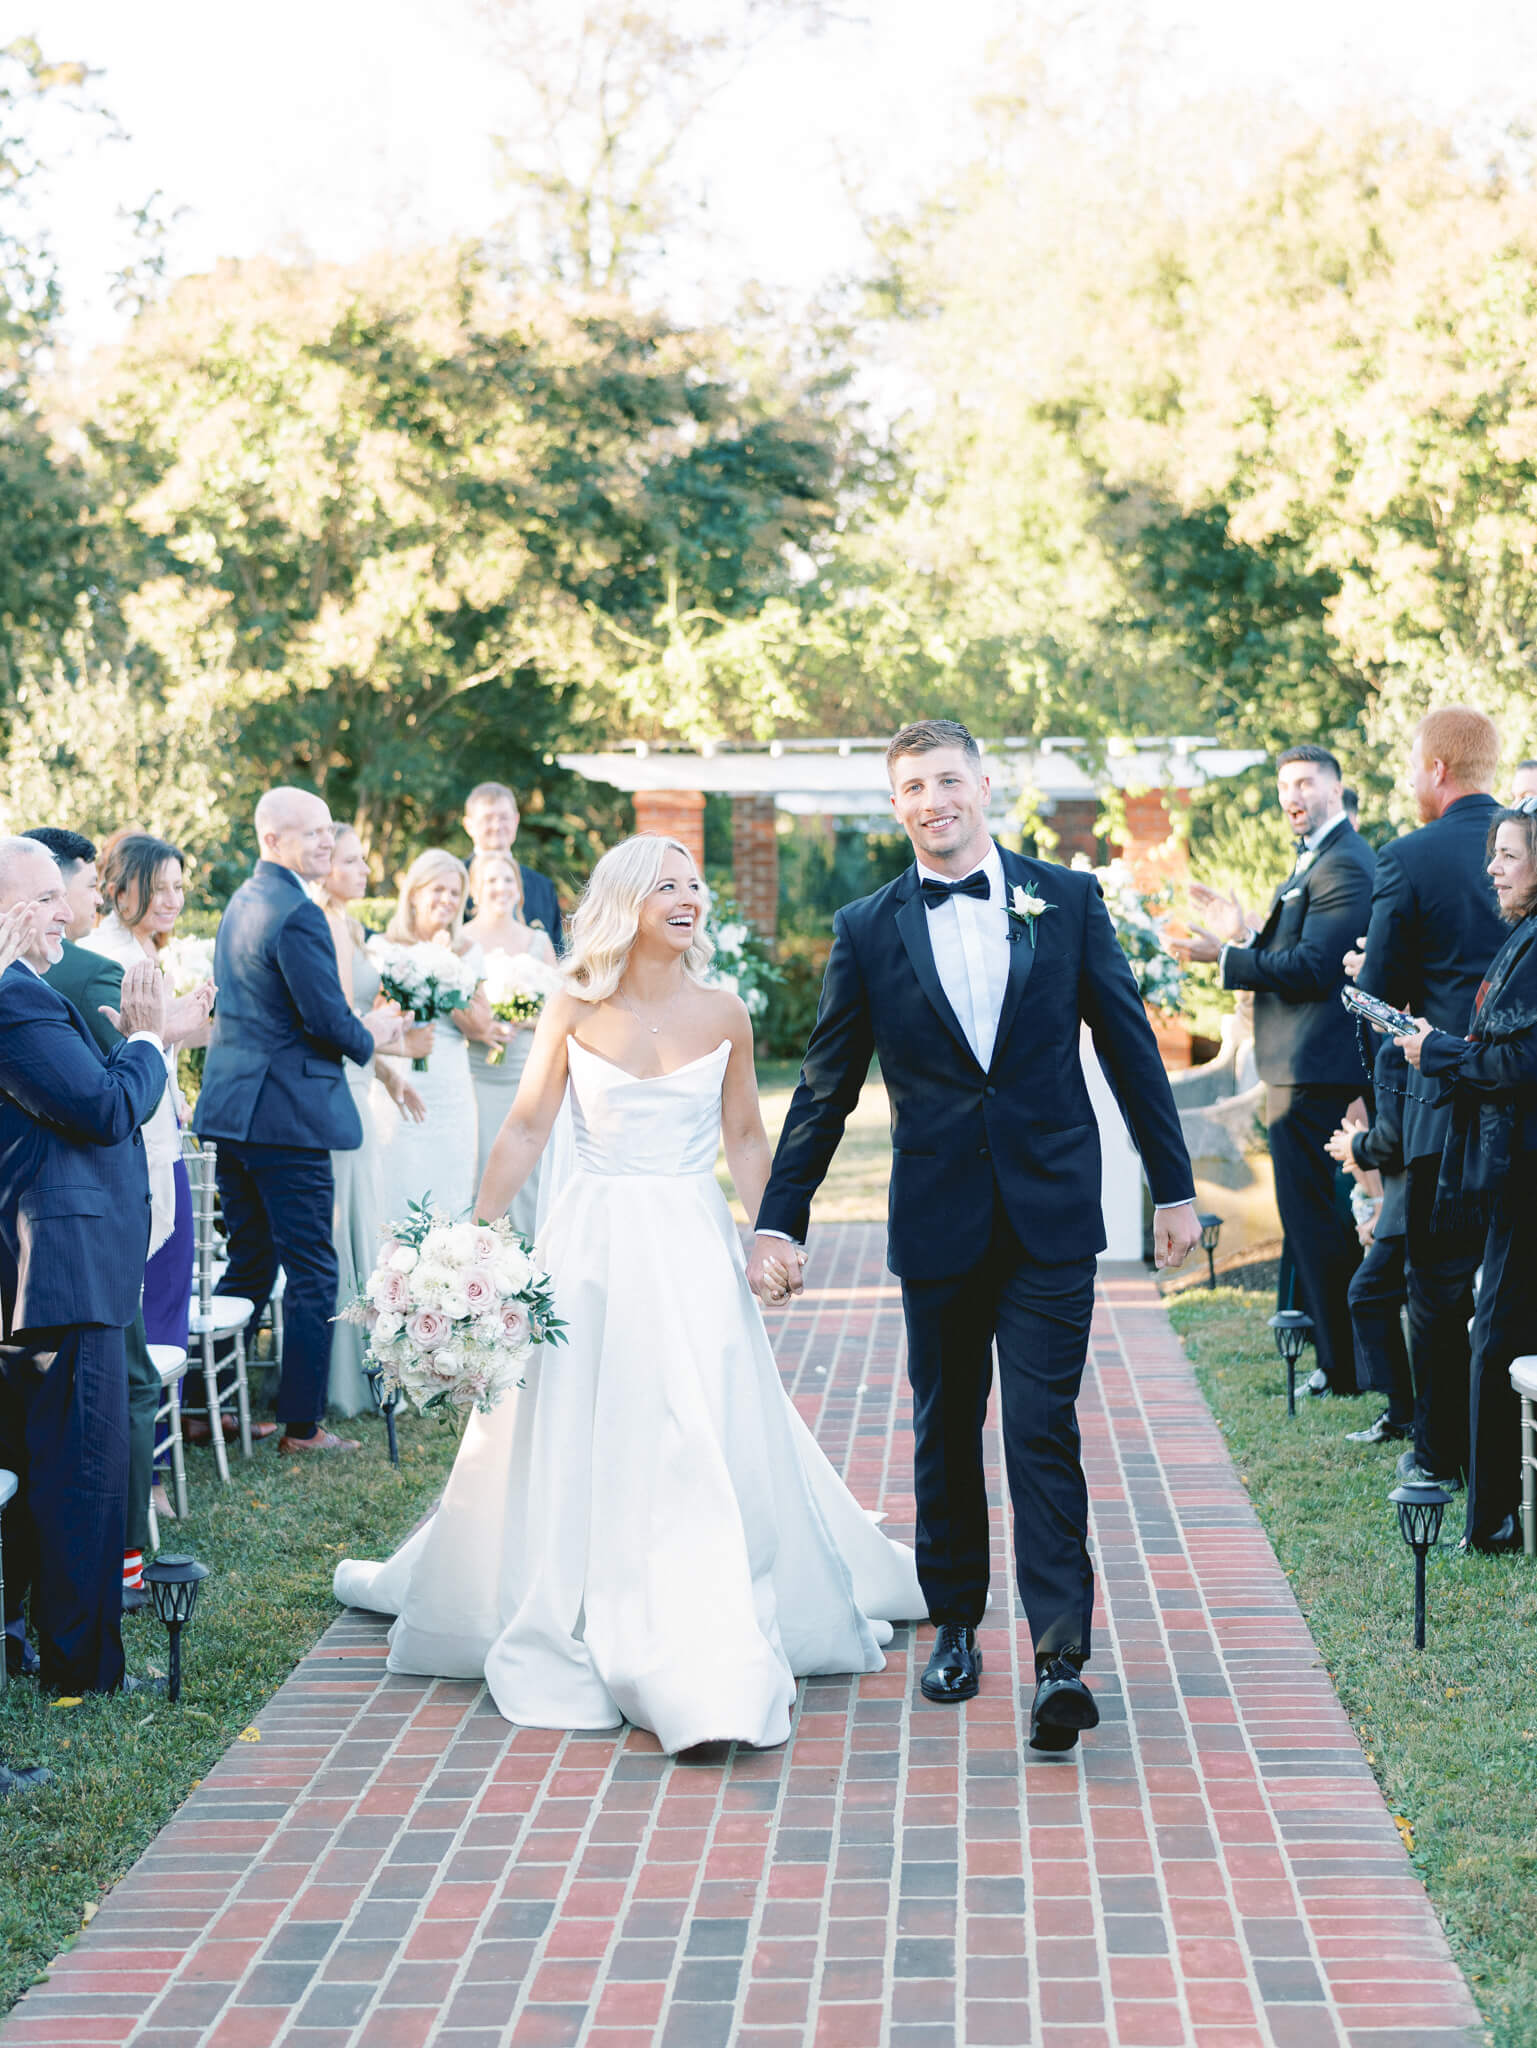 A bride and groom walking down the aisle smiling after getting married while their guests are standing and cheering.